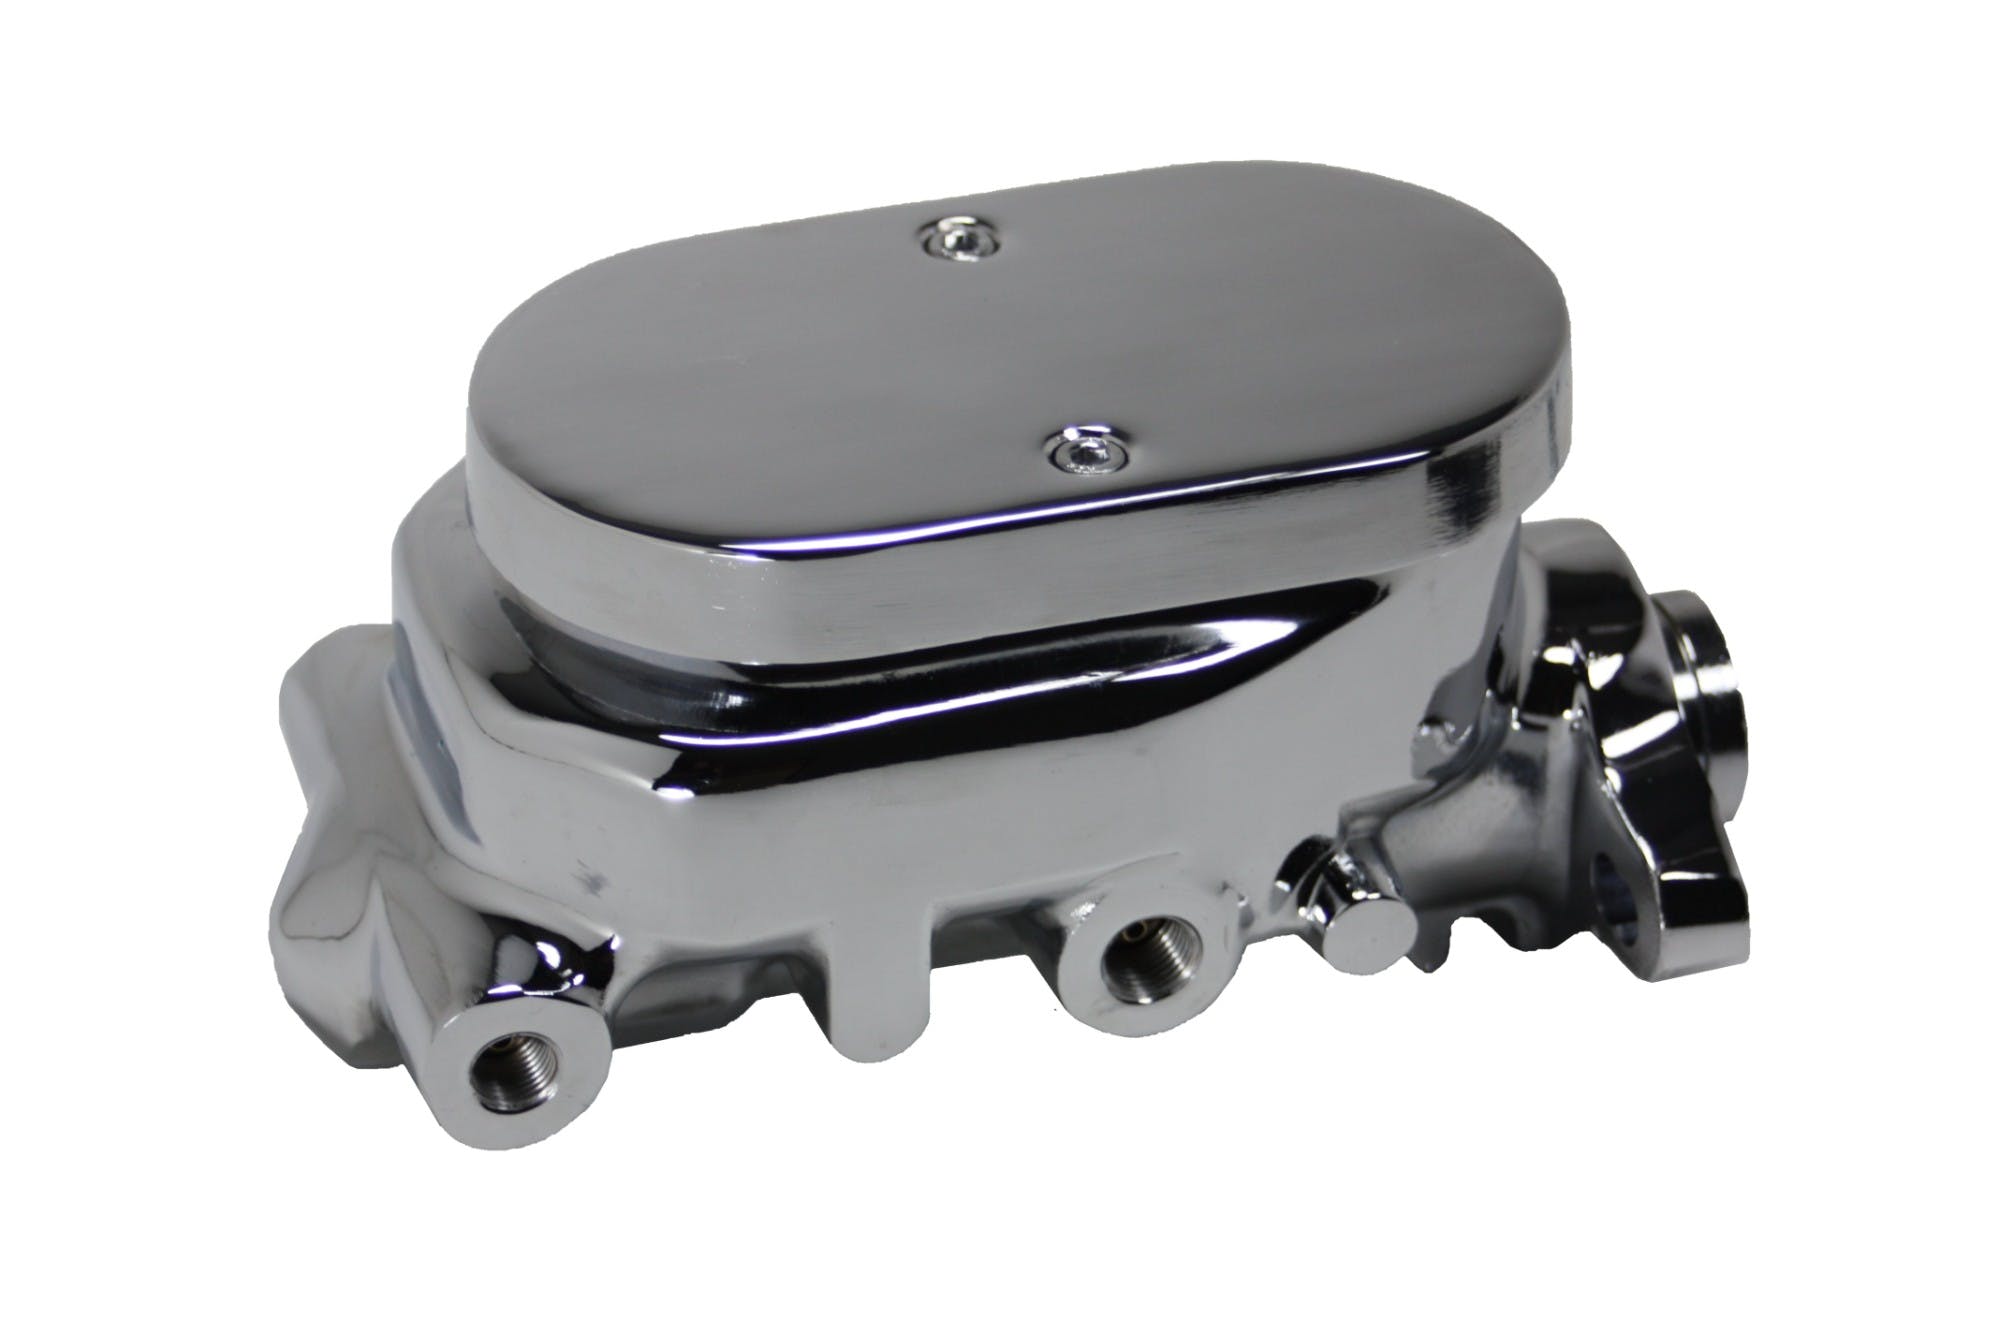 LEED Brakes 4V6B2 8 in Dual Power Booster ,1-1/8in Bore, side valve disc/drum (Chrome)